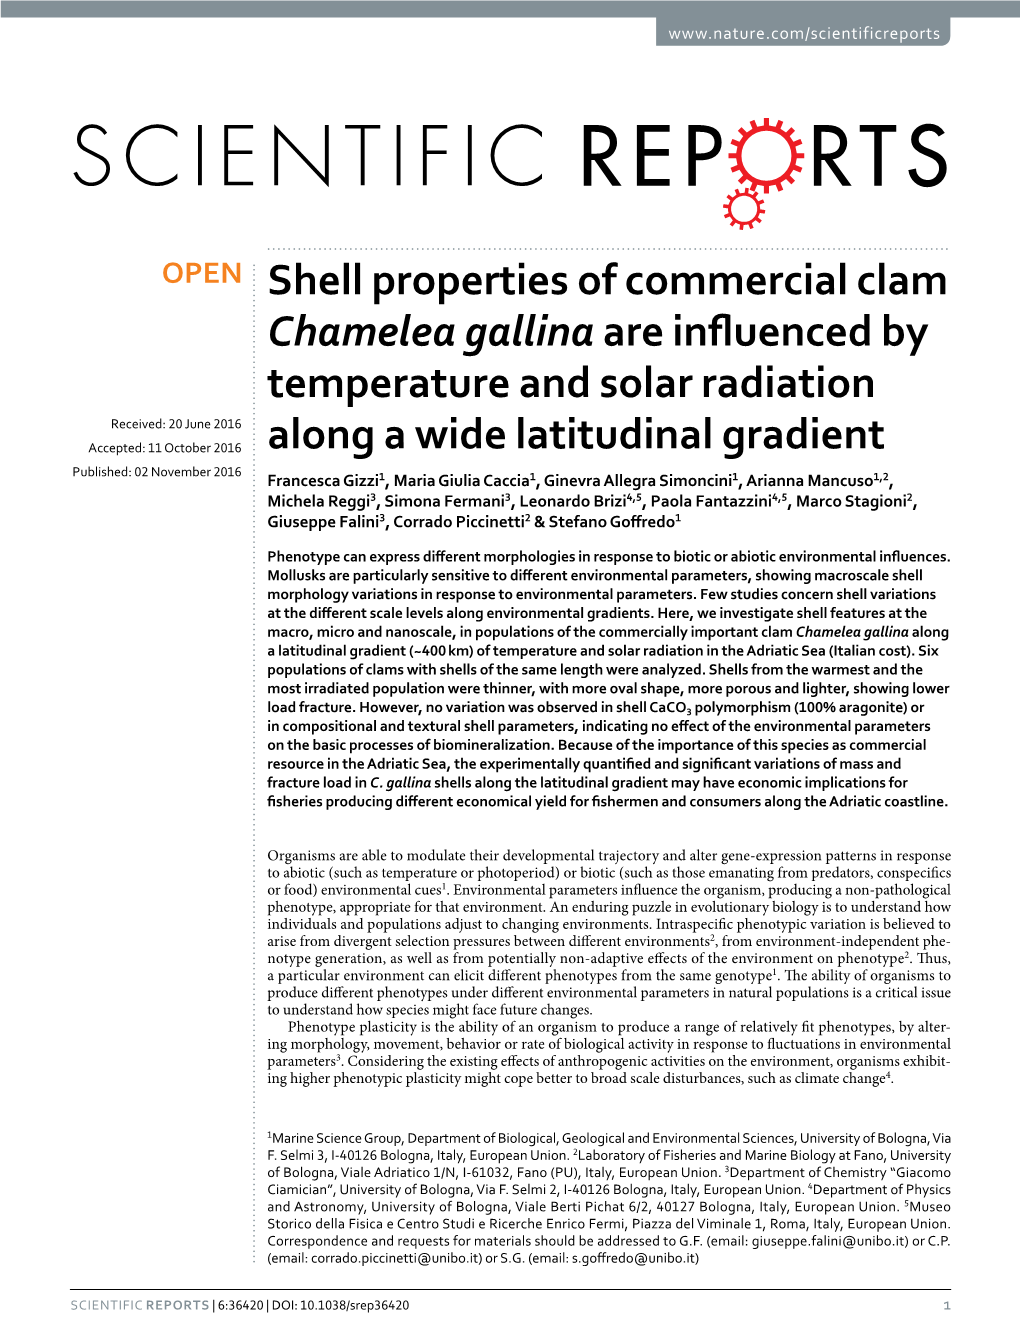 Shell Properties of Commercial Clam Chamelea Gallina Are Influenced By